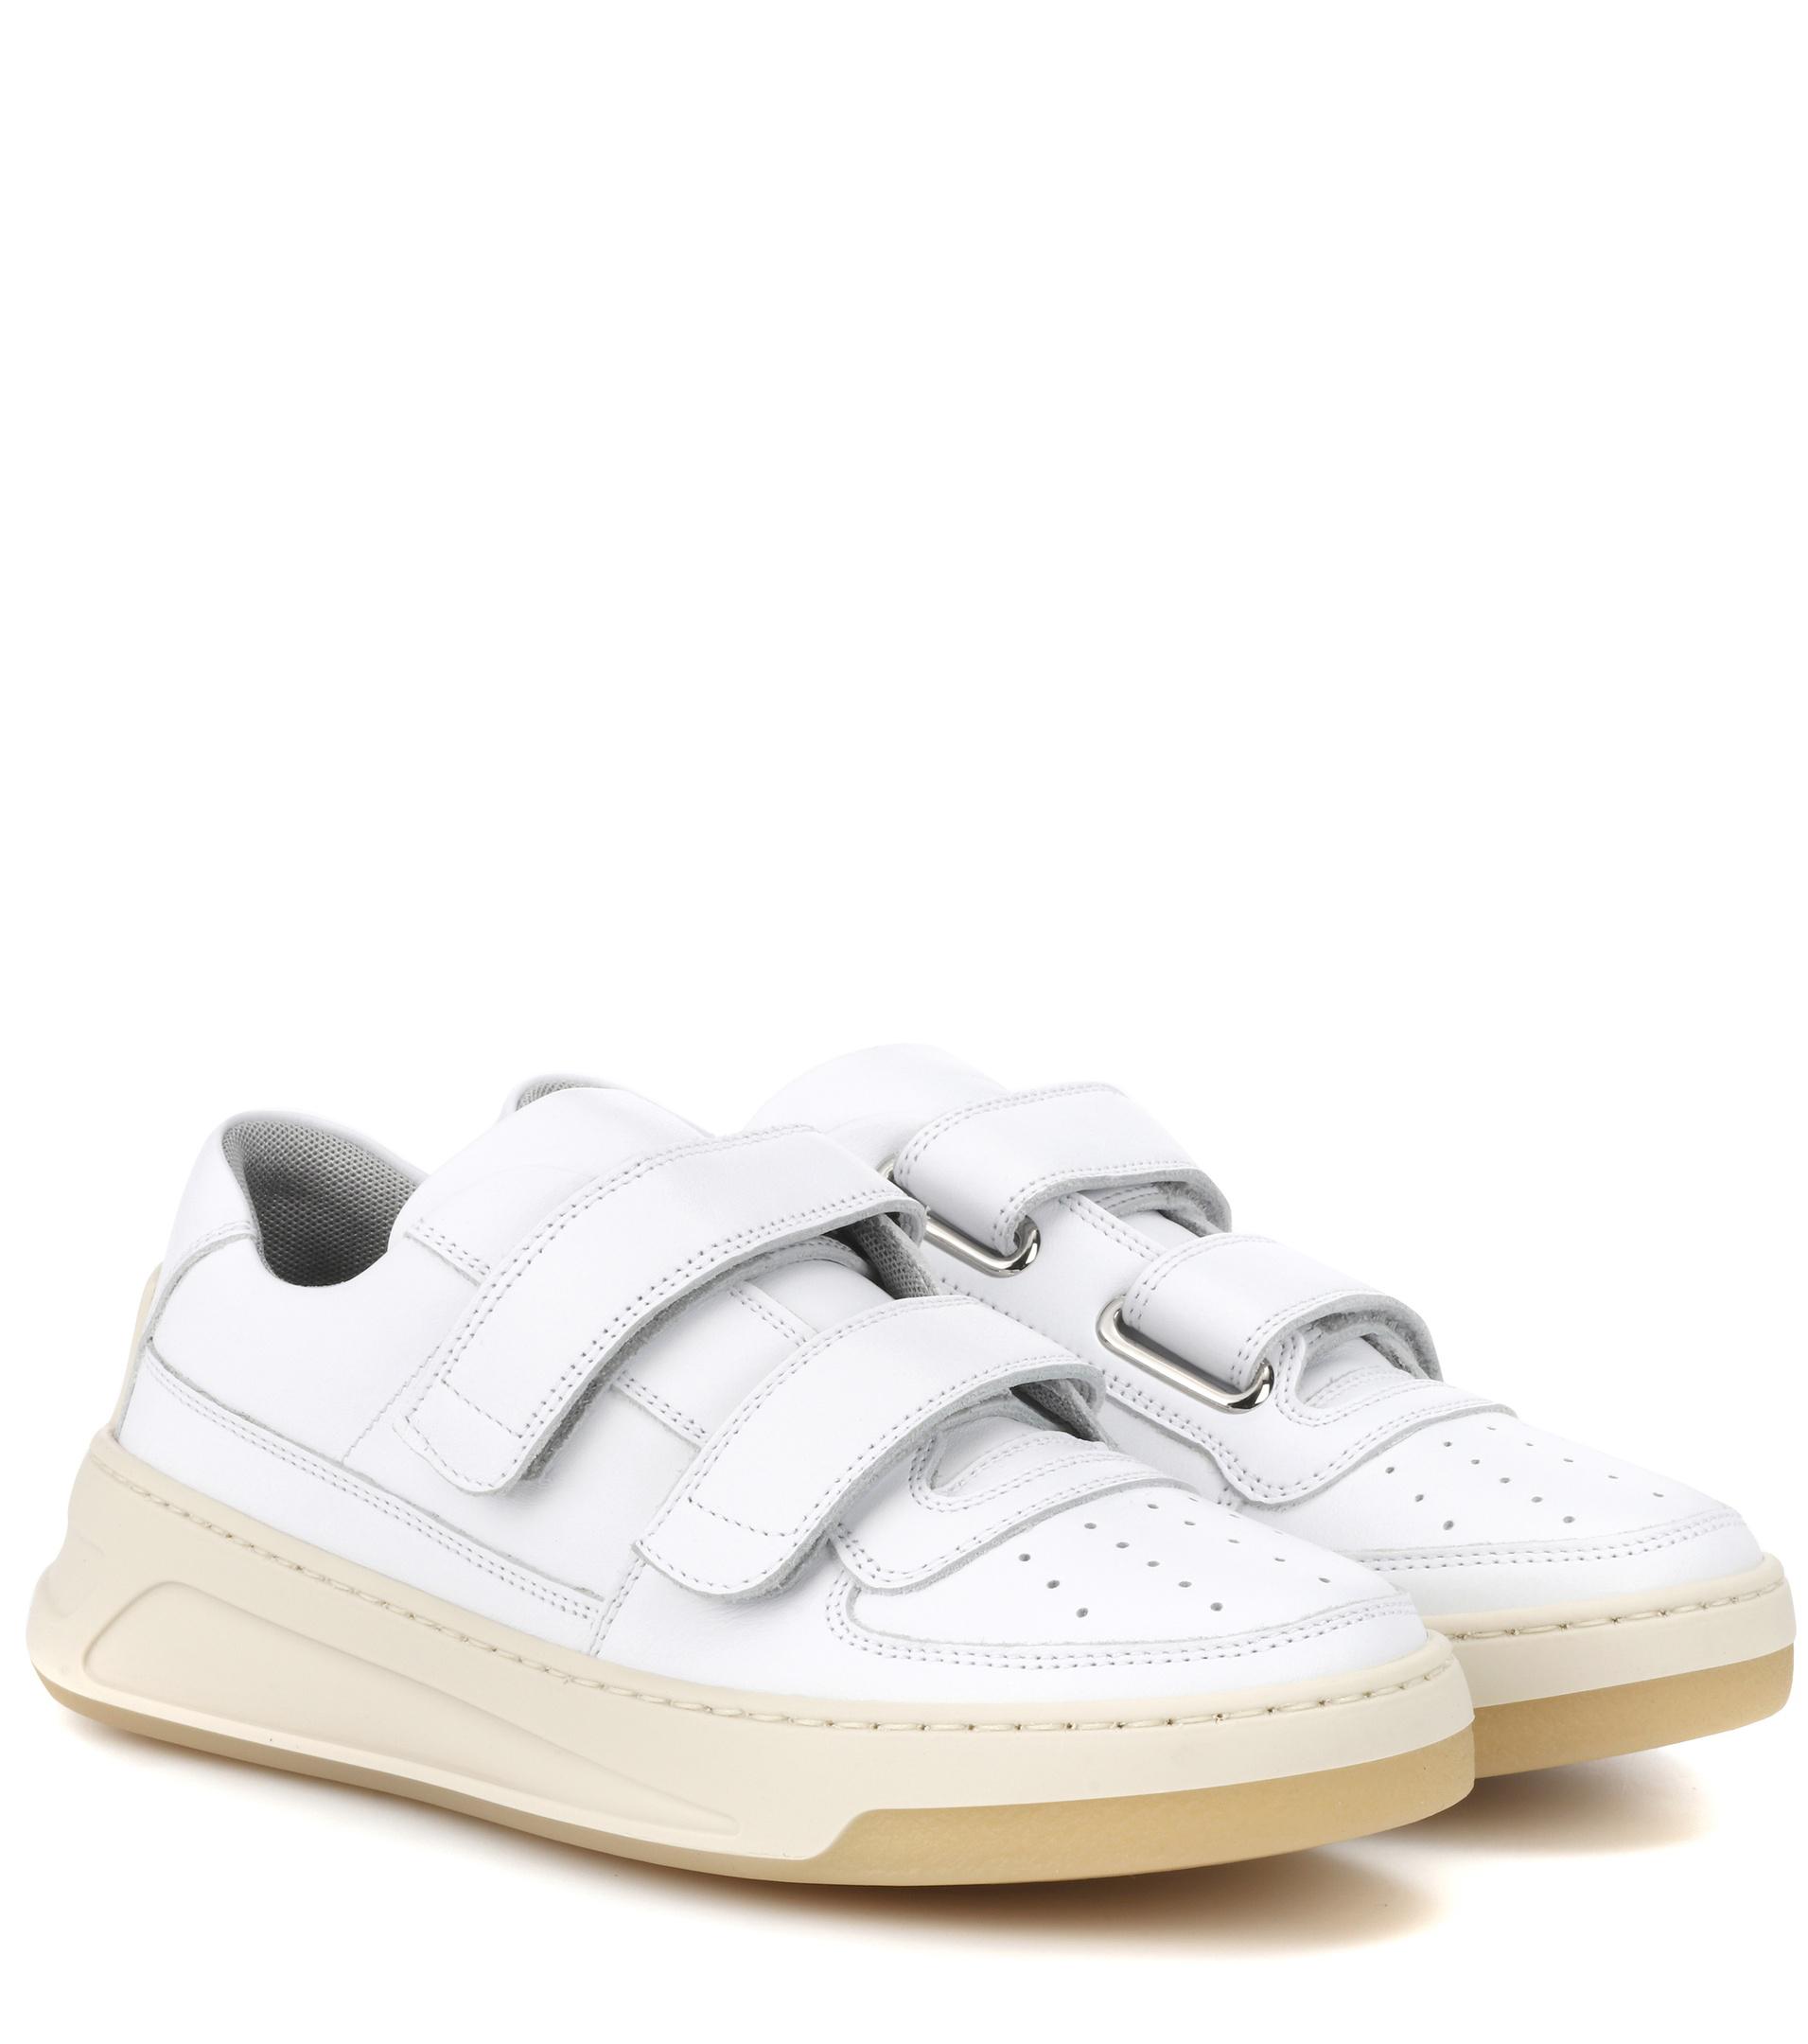 Acne Studios Steffey Leather Sneakers in White - Save 60% - Lyst